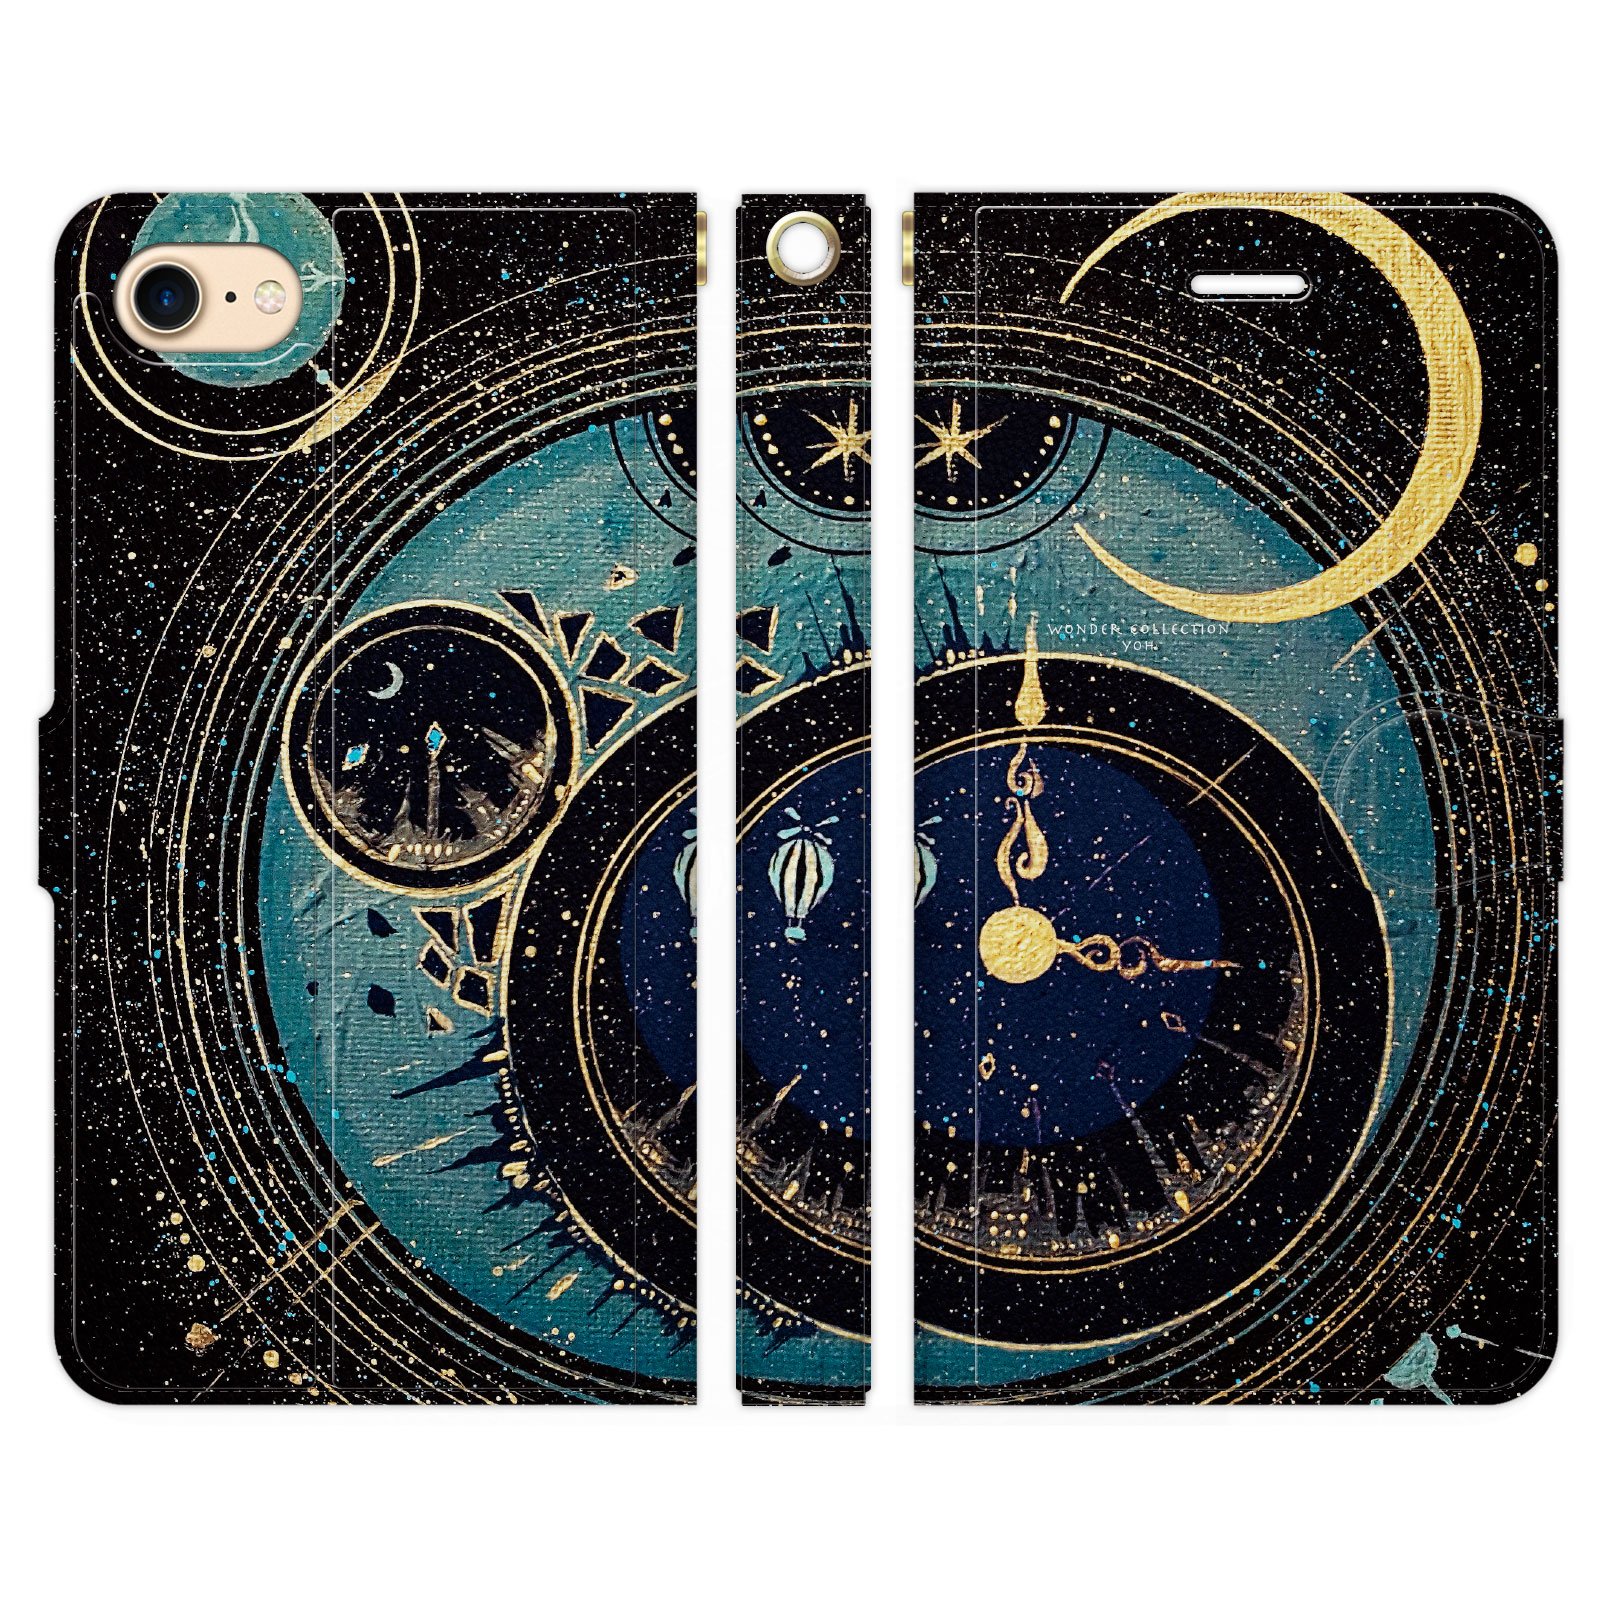 Brains iPhone SE 3rd Generation 2nd Generation iPhone 8 iPhone 7 6 6s Notebook Type Case Cover Wonder Collection Series Designers Universe Moon Star Star Space Pattern Galaxy Folding Card Pocket iPhoneSE3